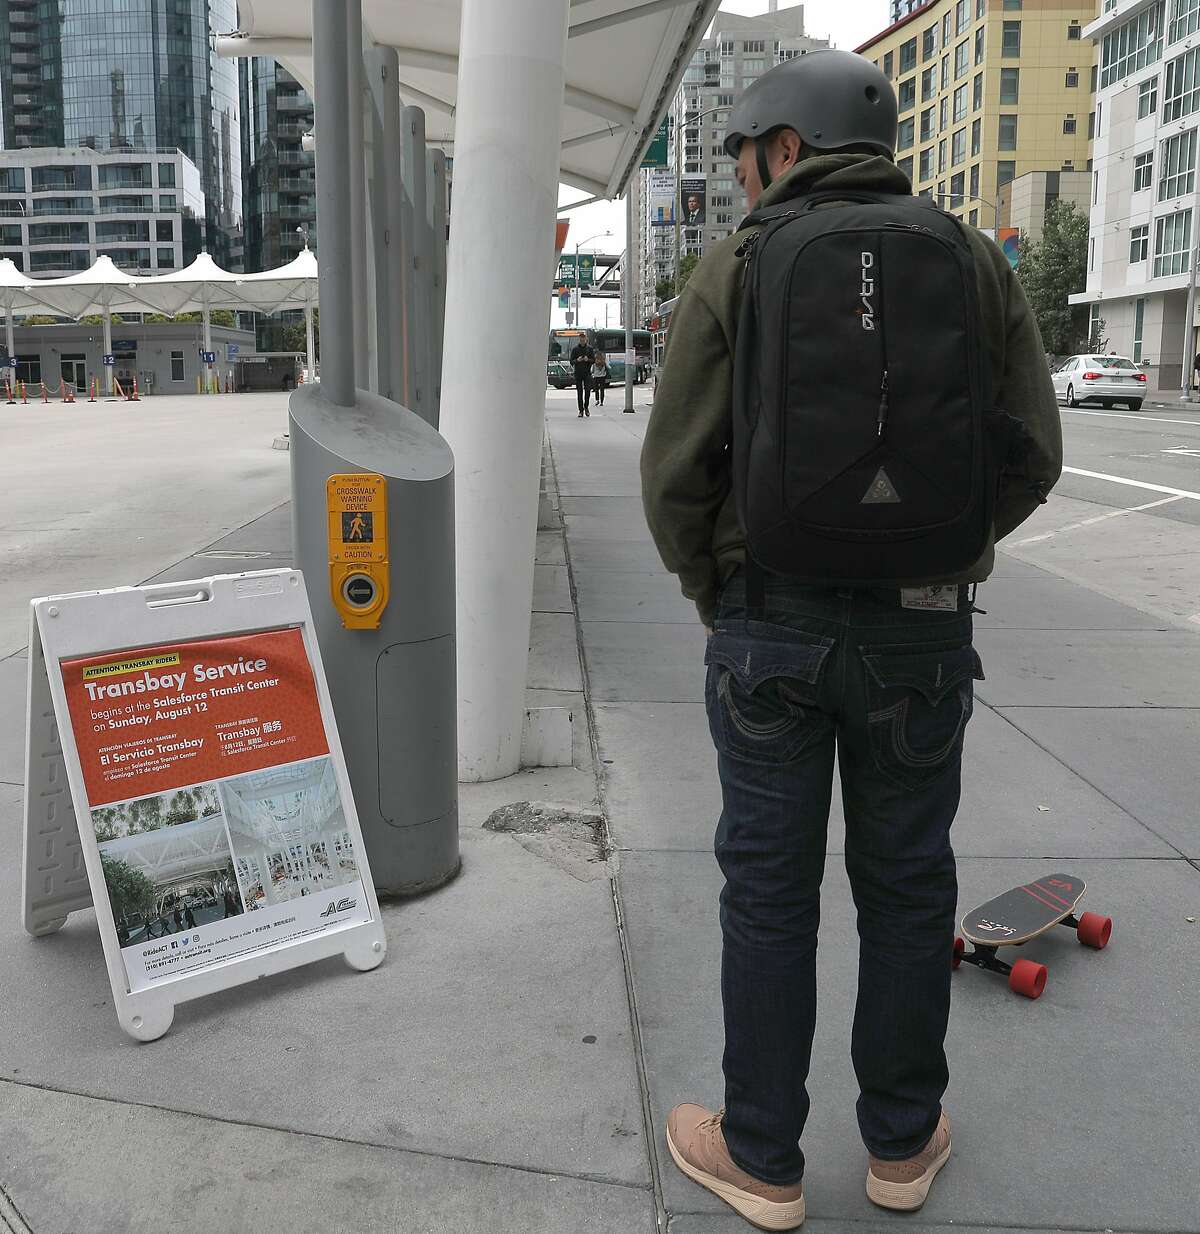 John Diamonon commuting from Union City reads about the moving schedule of The Temporary Transbay Terminal which is going to become a park and affordable housing after the new terminal opens after today on Wednesday, Aug. 8, 2018 in San Francisco, Calif.